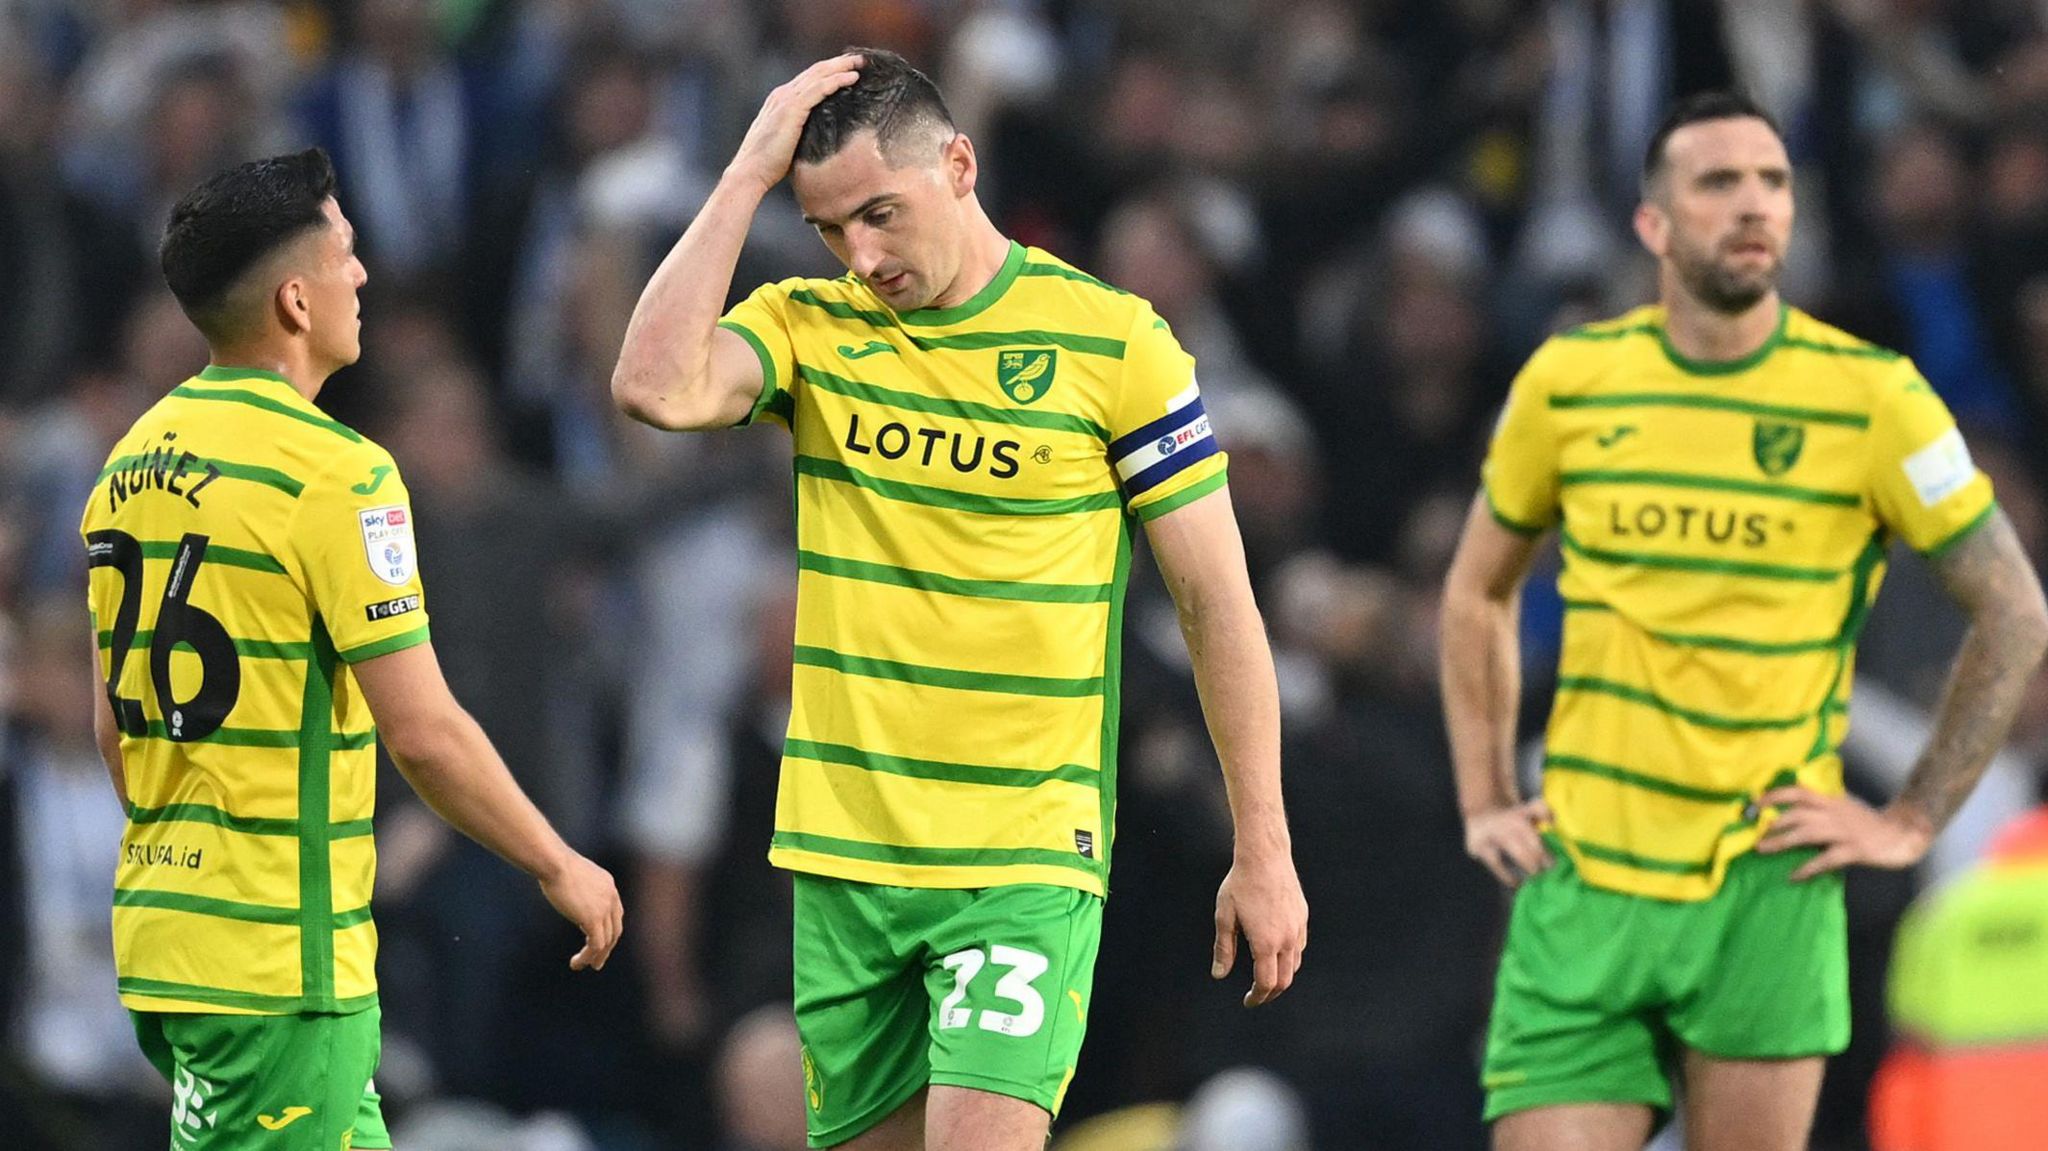 Norwich dejected following defeat at Leeds